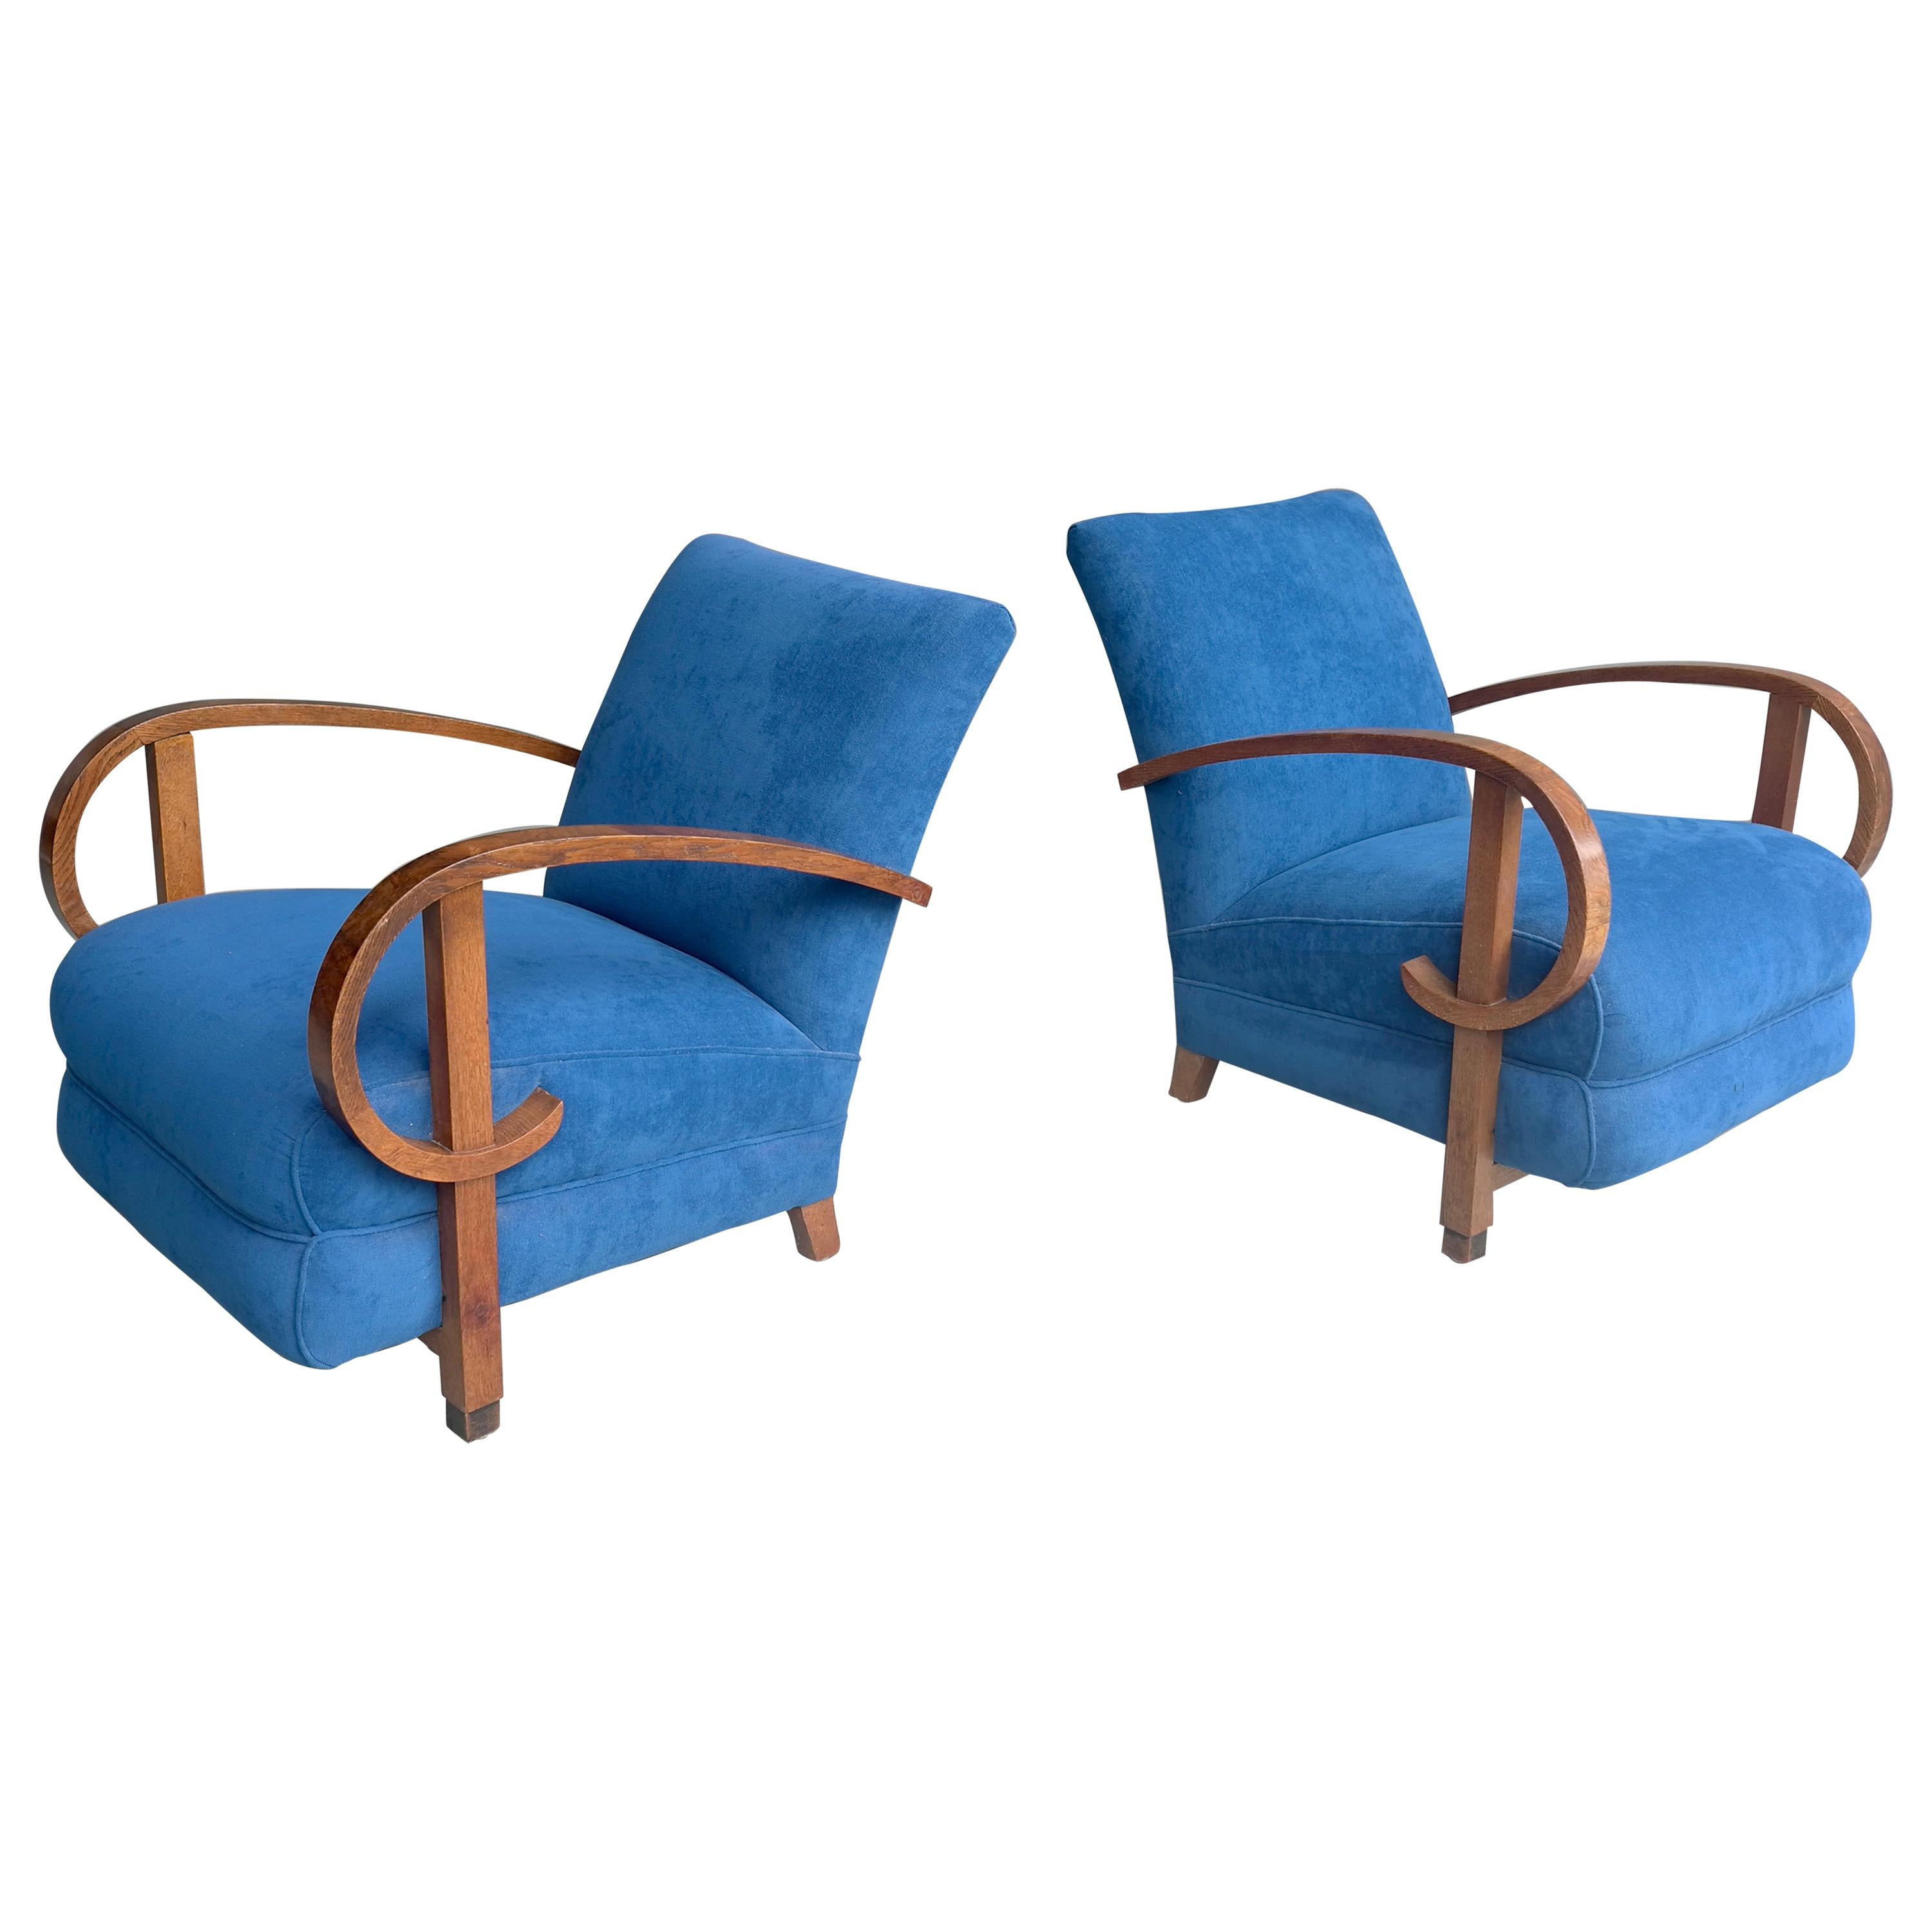 Pair of Sculptural Curved Walnut Deco Armchairs in Blue Fabric, France, 1940s